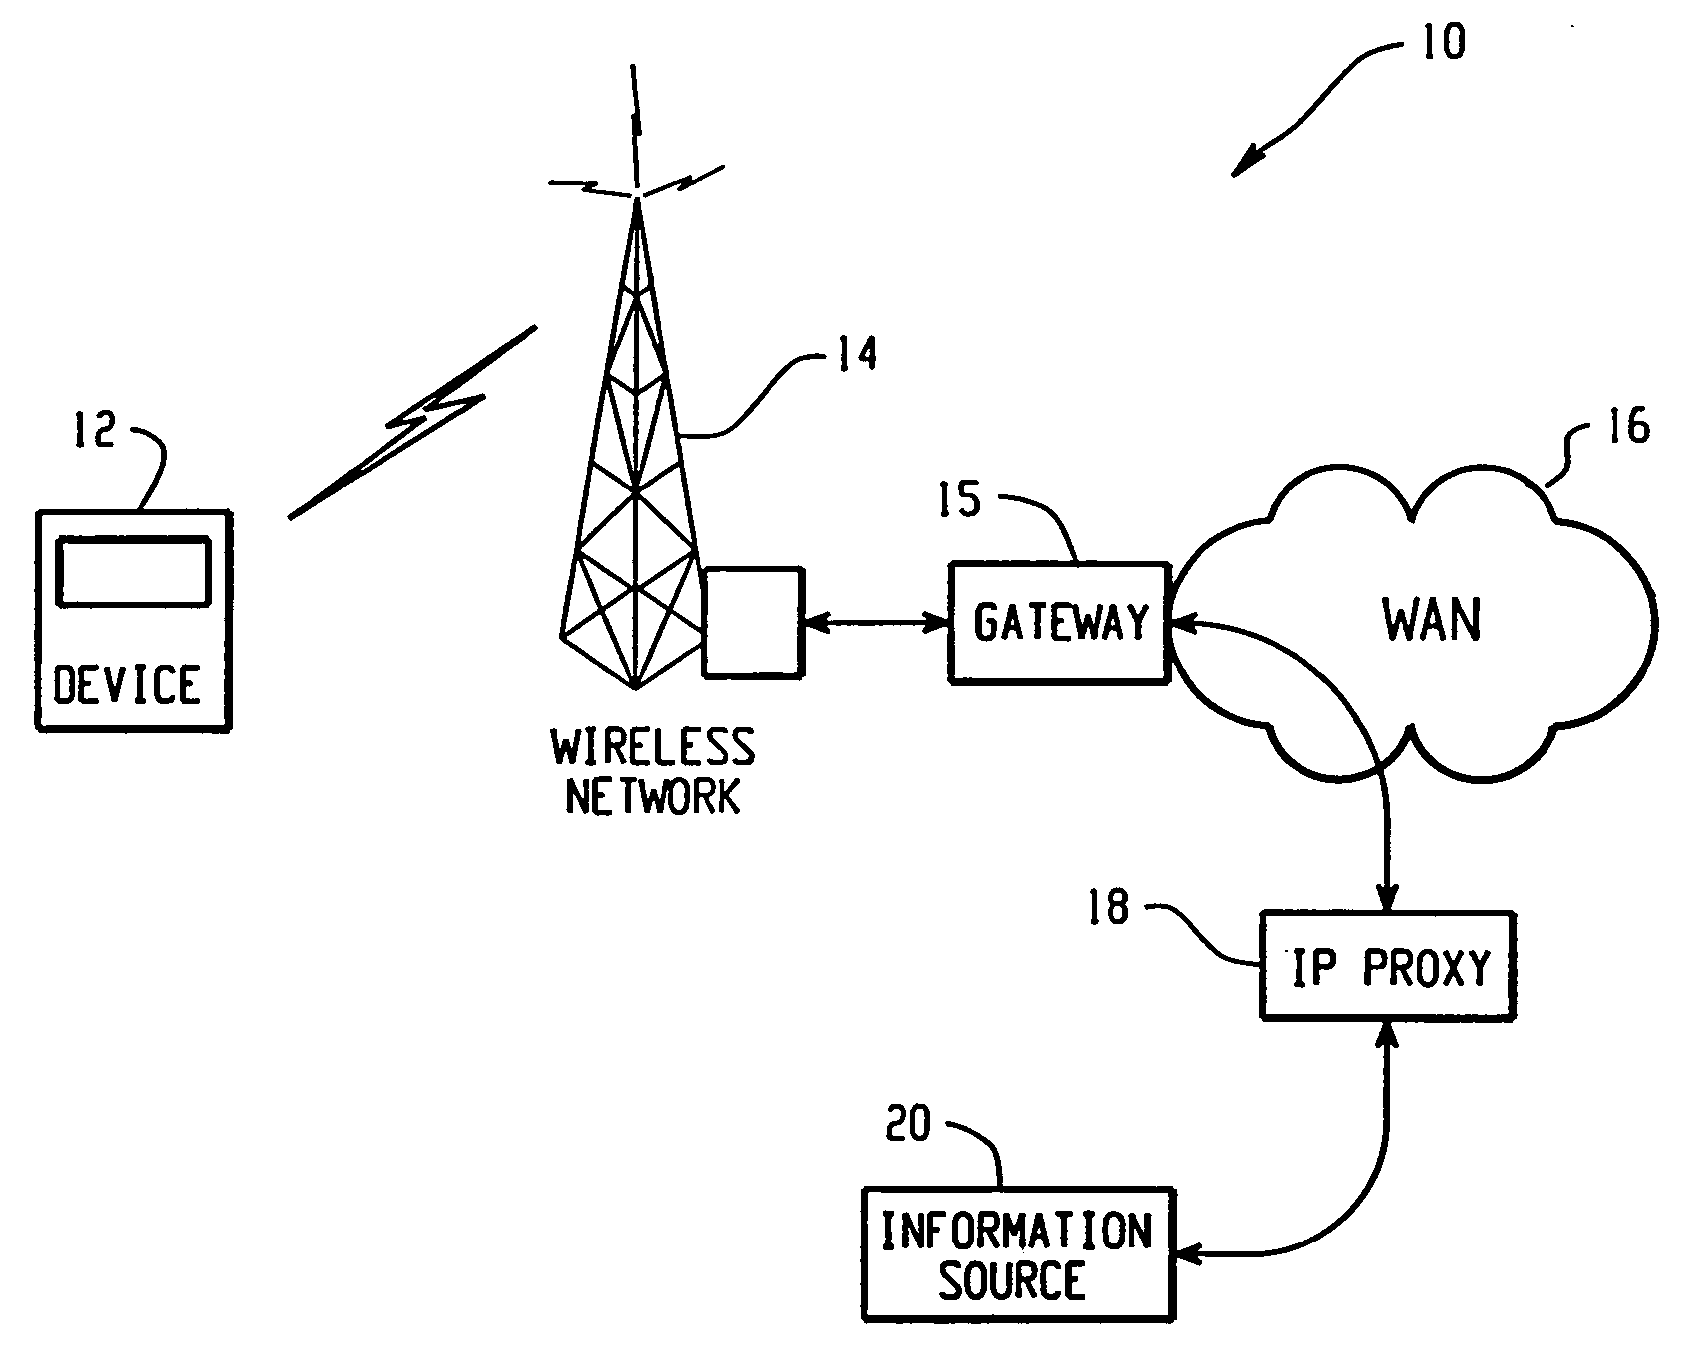 System and method for providing remote data access and transcoding for a mobile communication device